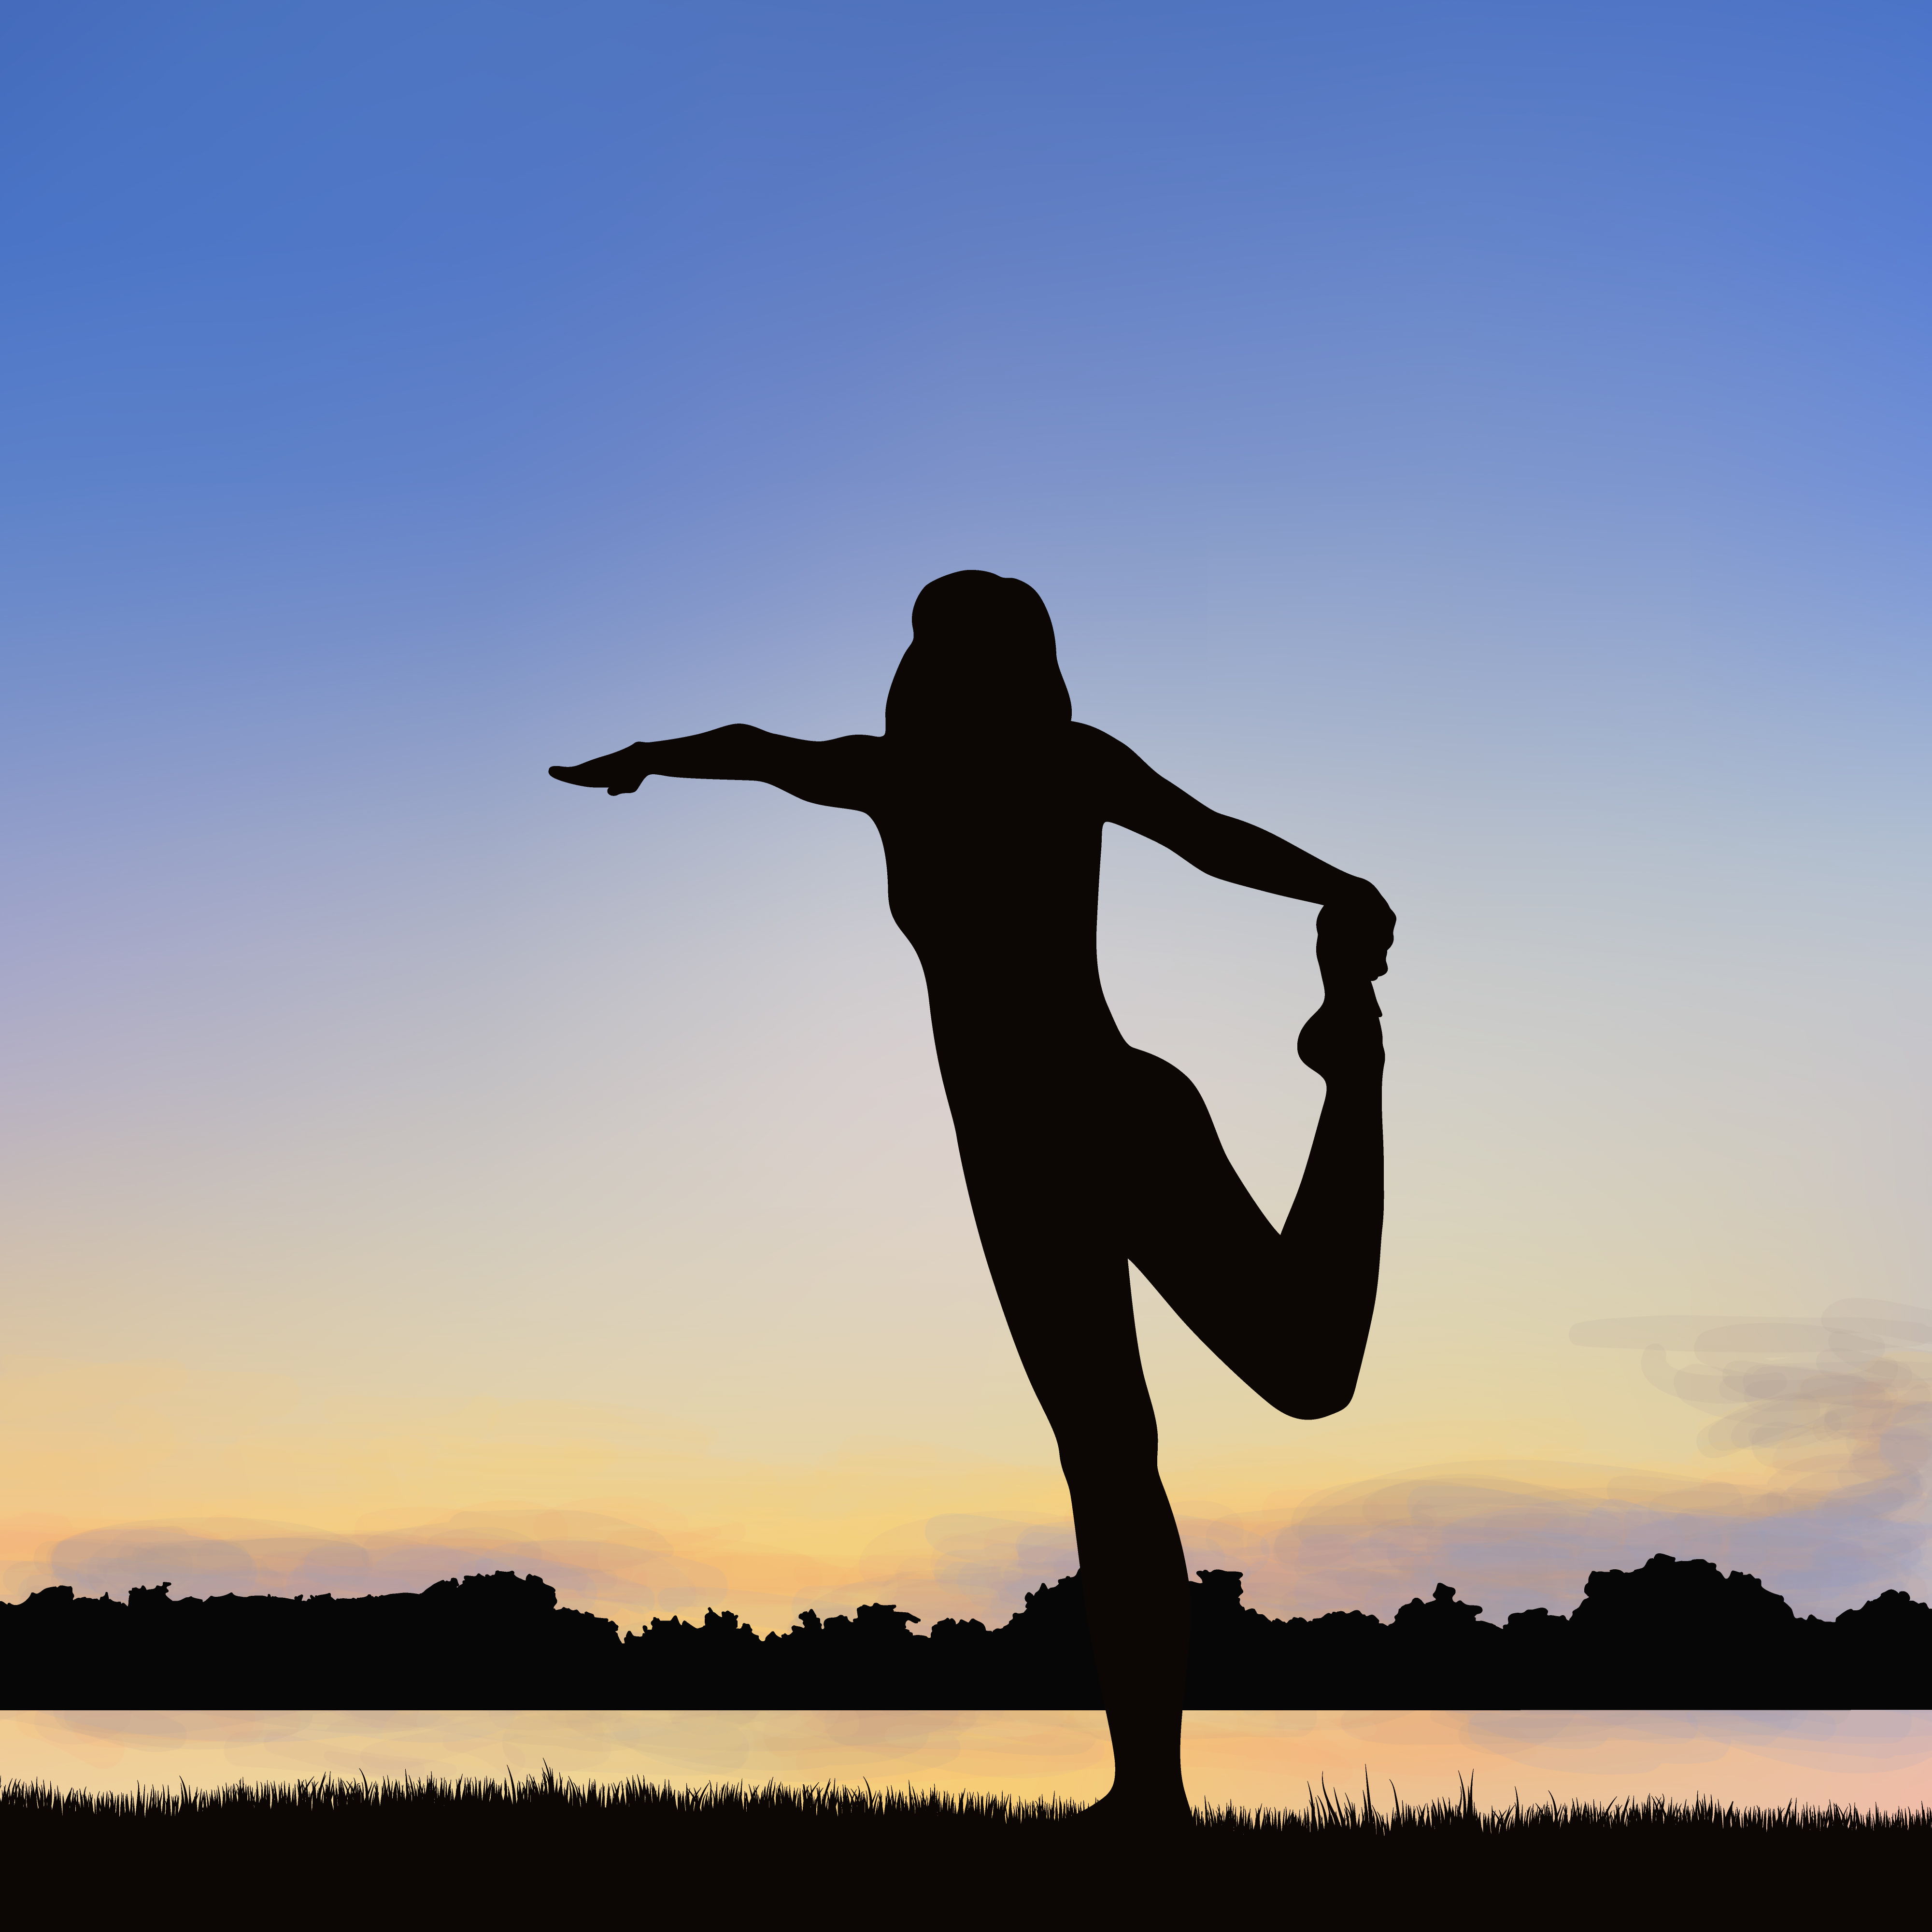 Lady silhouette  image in the posture of Yoga 363590 